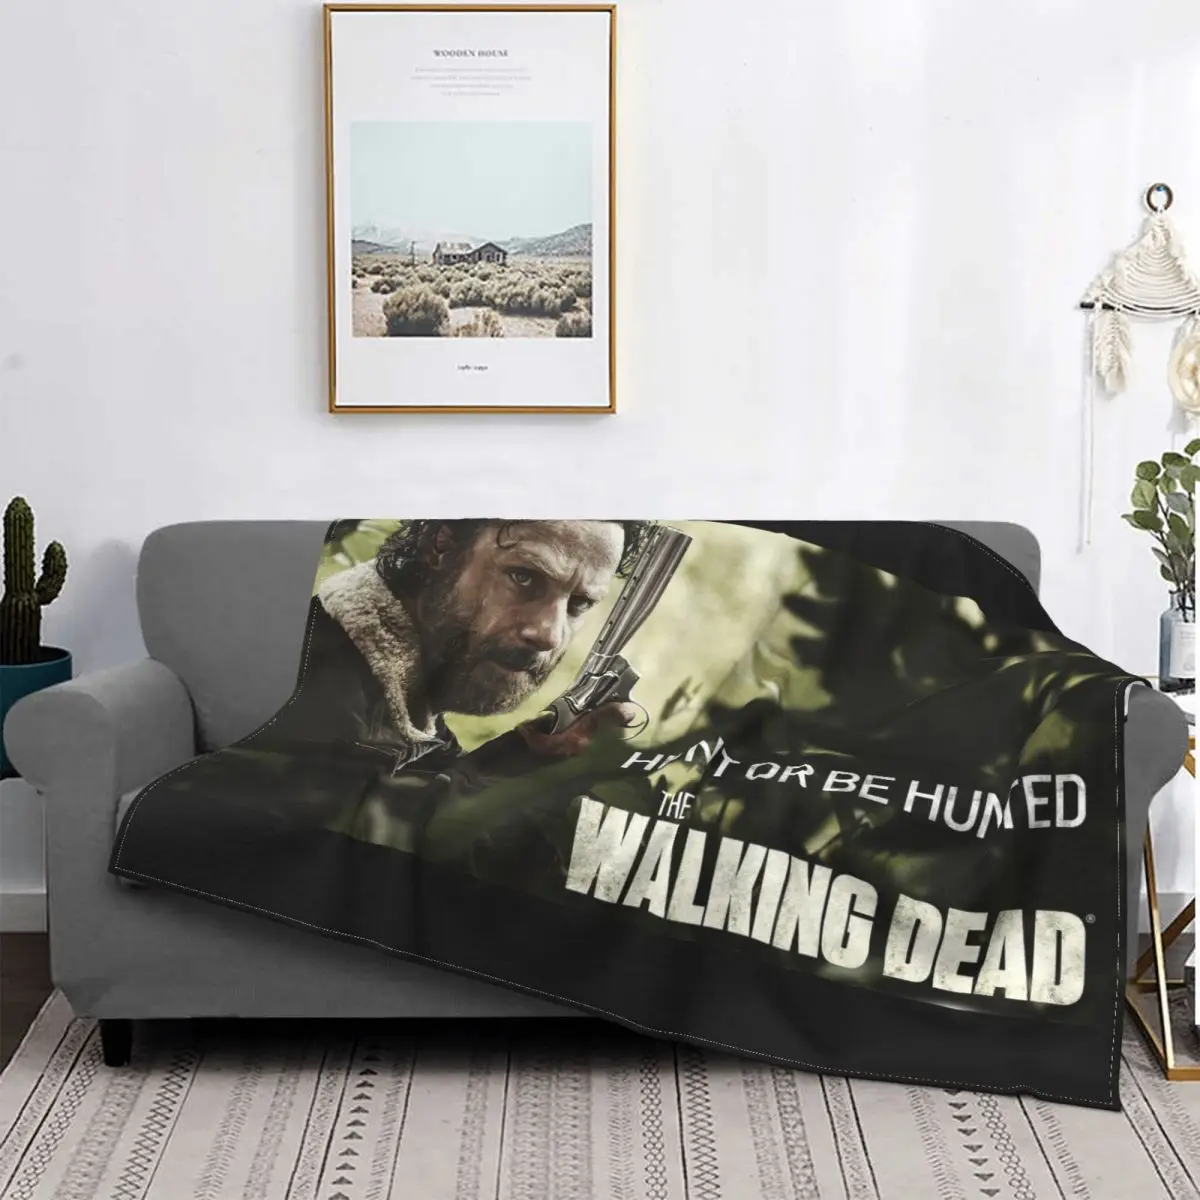 

Rick Grimes Andrew Lincoln Blankets The Walking Dead Horror Zombie Flannel Vintage Soft Throw Blanket for Bed Sofa Textile Decor